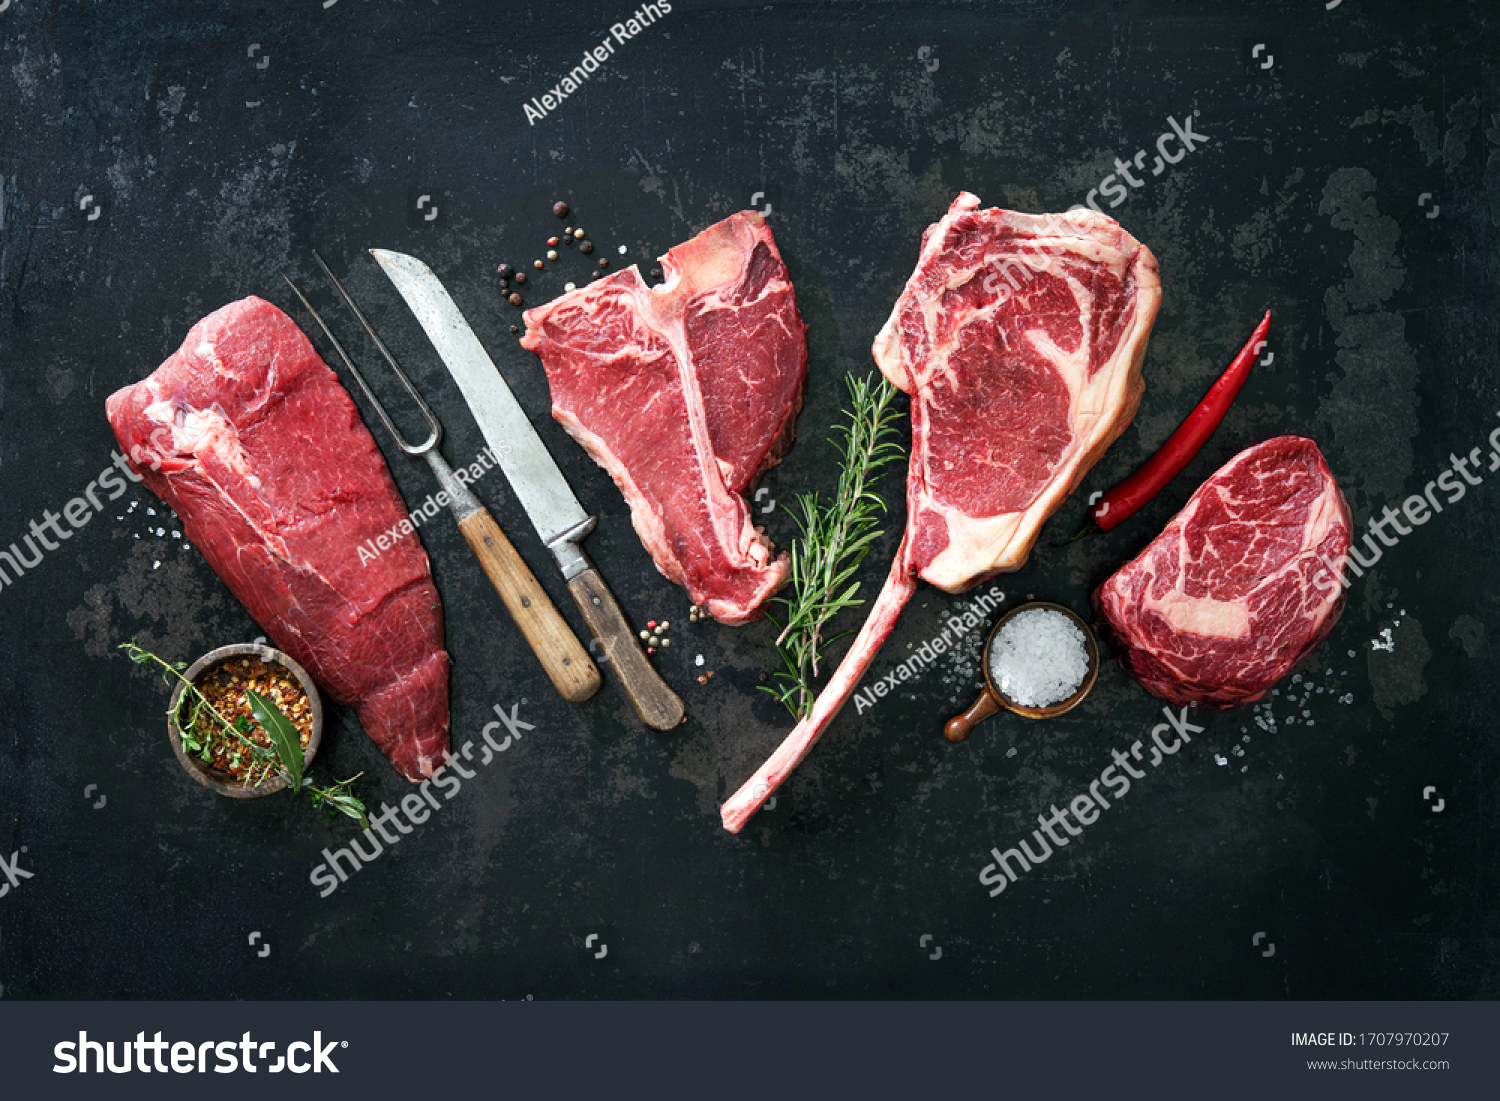 Variety of raw beef meat steaks for grilling #1707970207